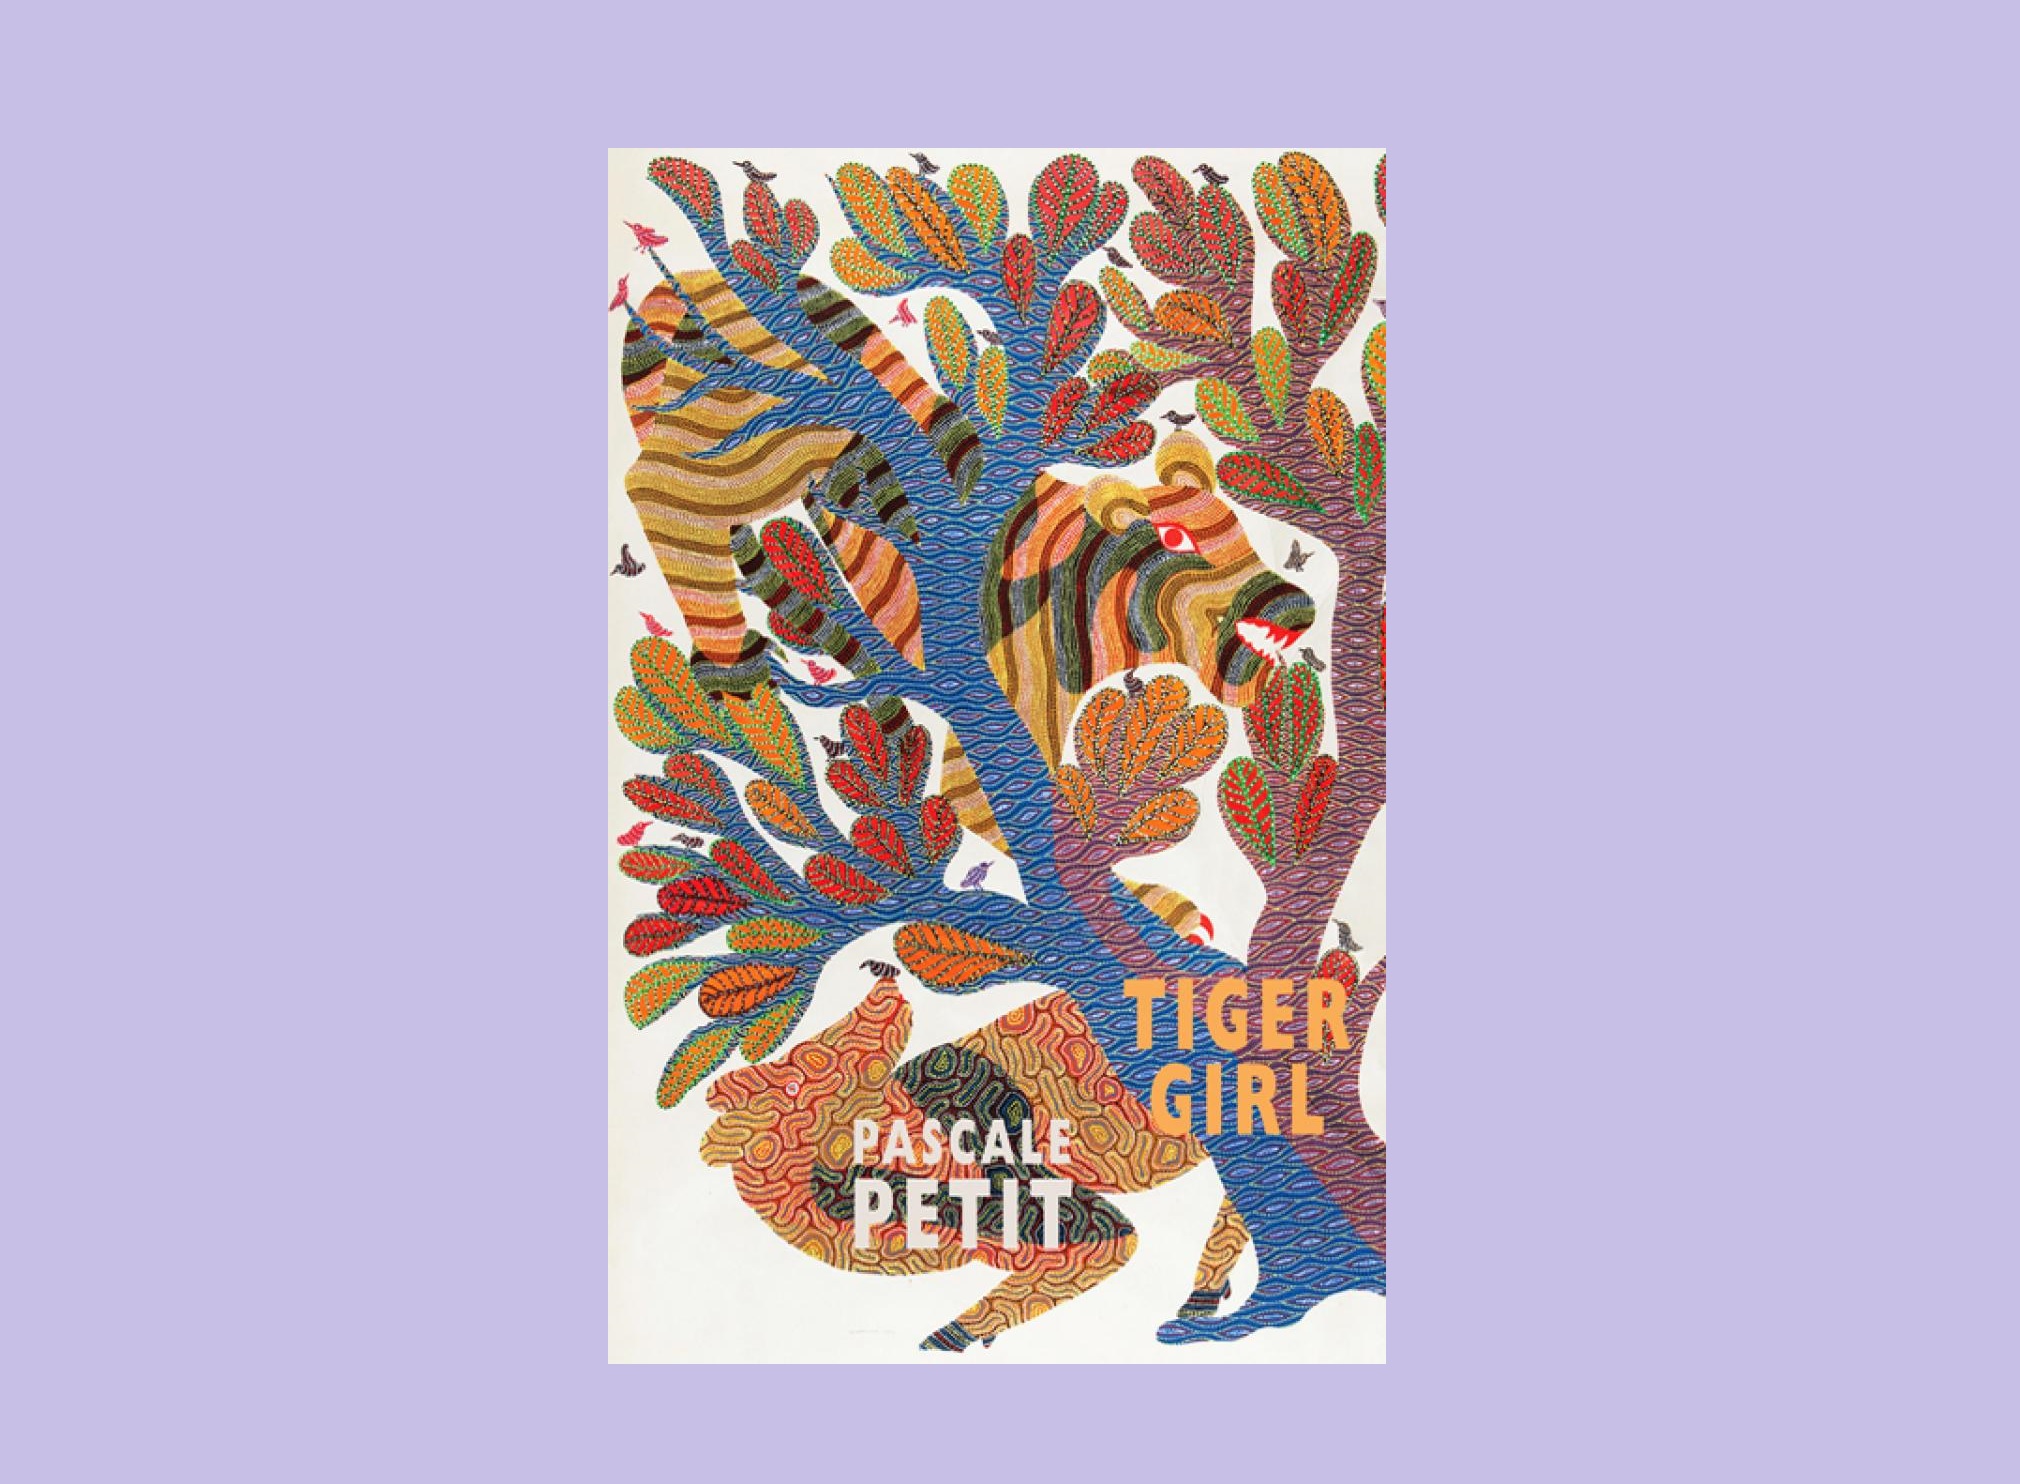 On ‘Tiger Girl’ by Pascale Petit